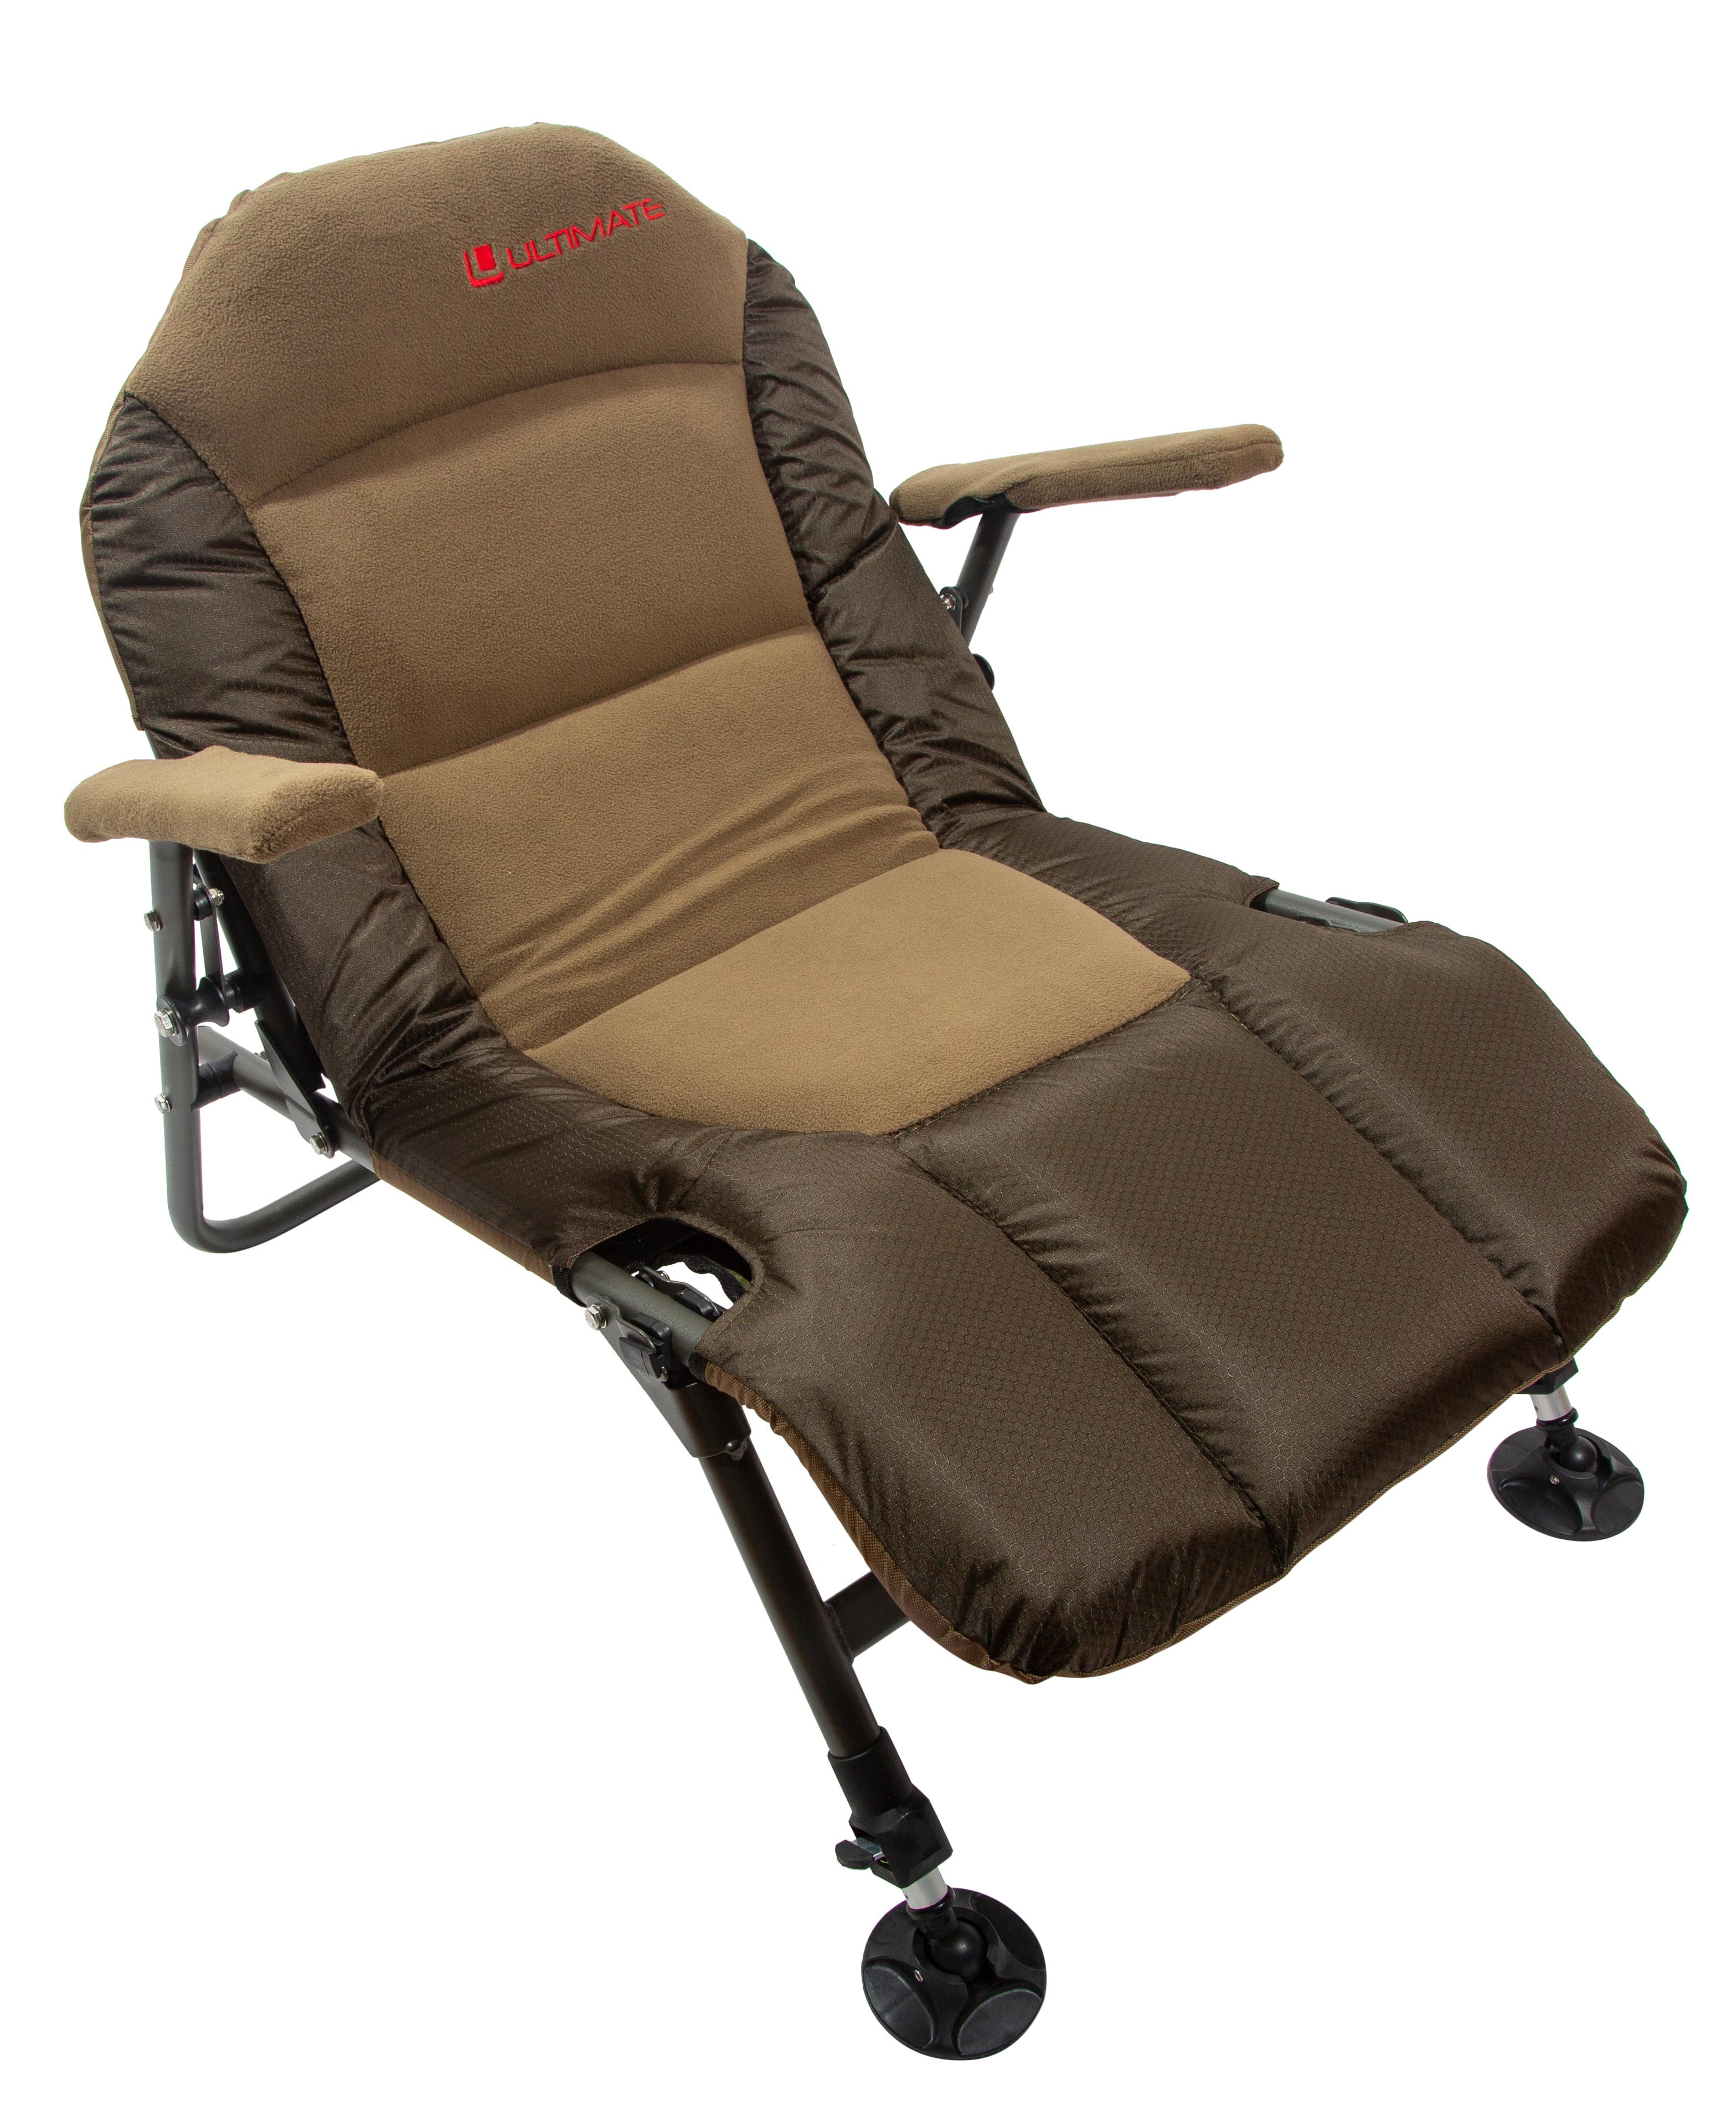 Chaise longue Ultimate Lounger Chair